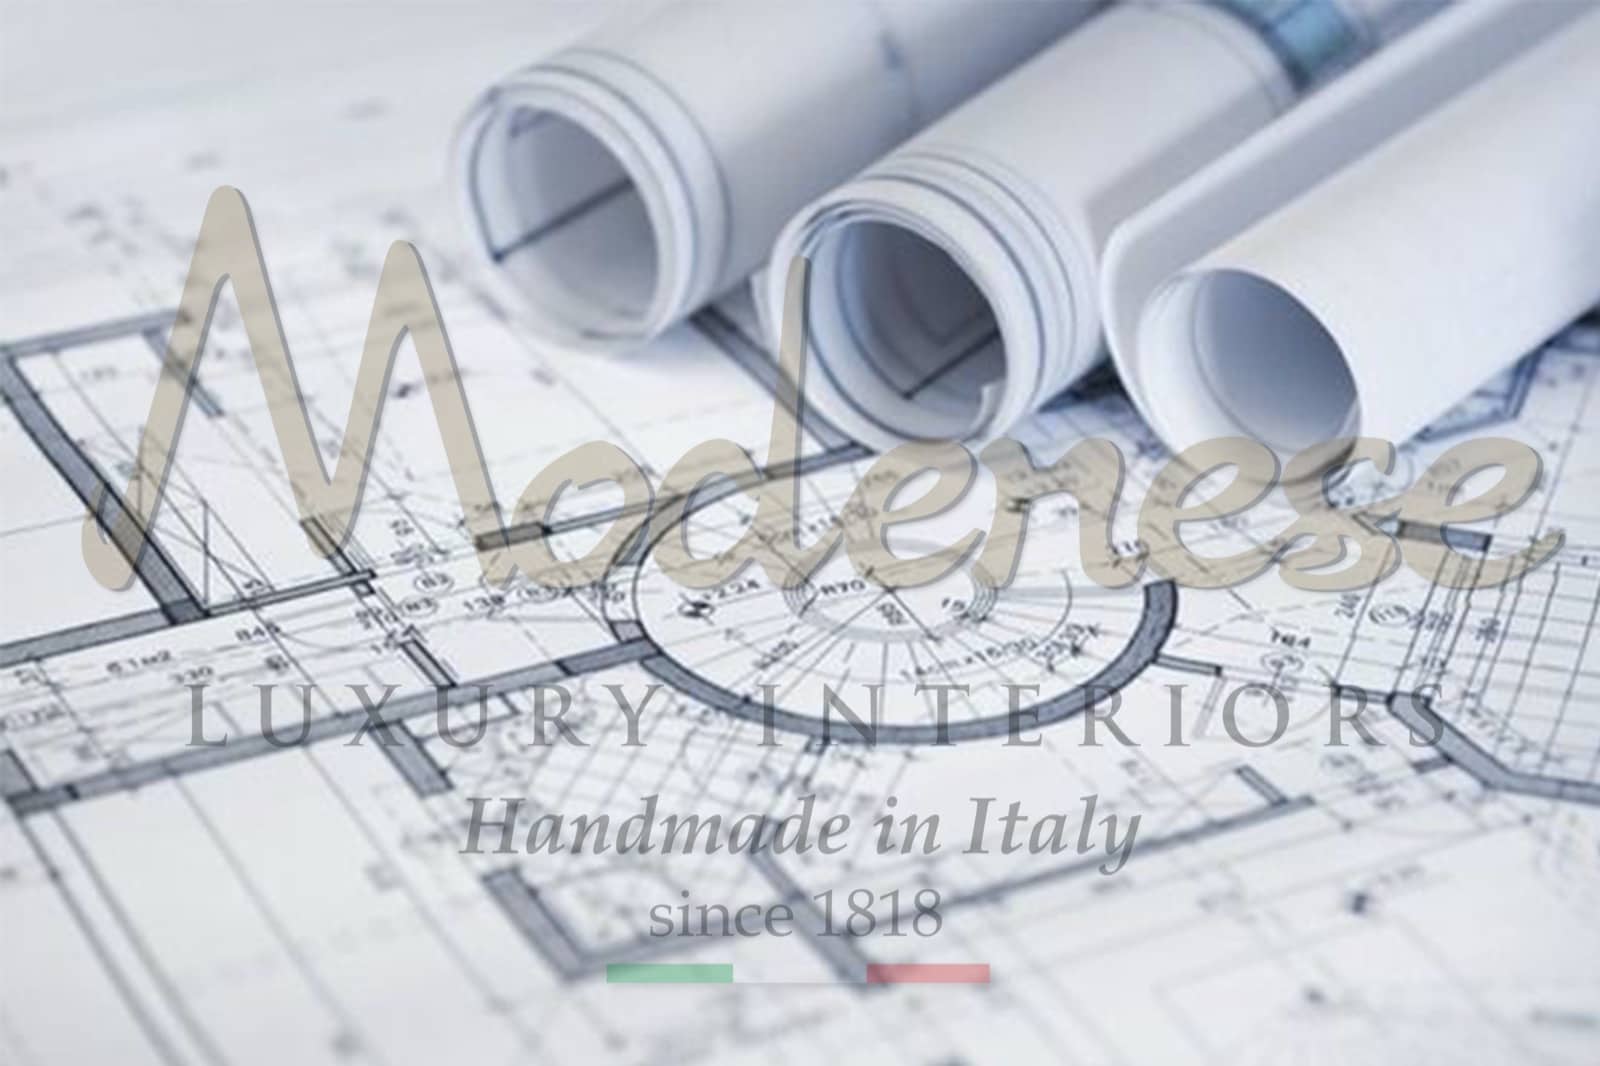 design studio project villa construction proposals designed basis need requirements taste different solutions through two-dimensional three-dimensional study spaces royal designs Italian made in Italy furniture decoration empire proposal ad hoc architectural layout luxury interior design